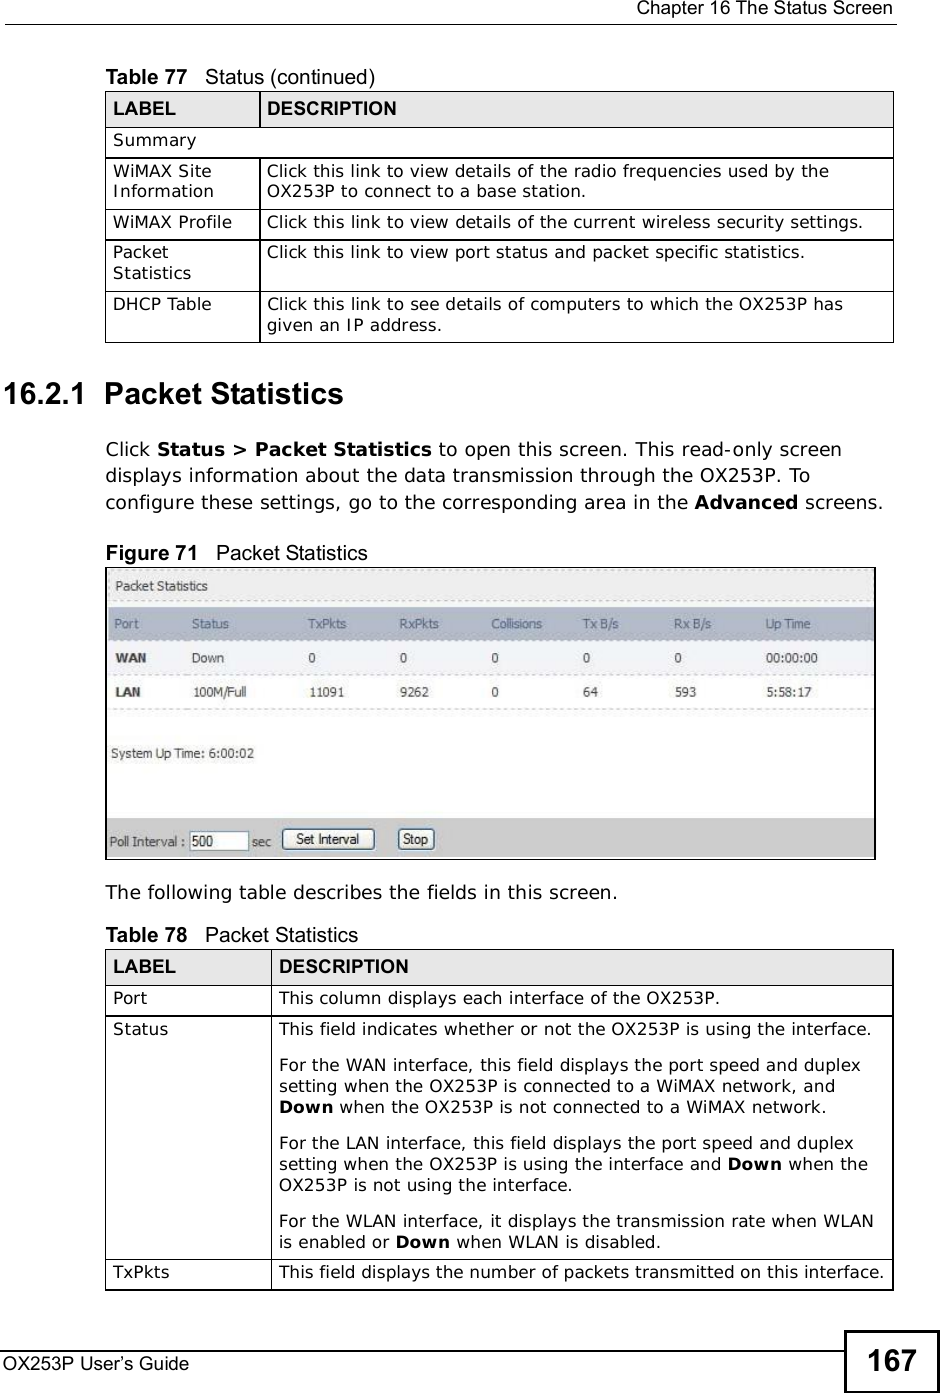  Chapter 16The Status ScreenOX253P User’s Guide 16716.2.1  Packet StatisticsClick Status &gt; Packet Statistics to open this screen. This read-only screen displays information about the data transmission through the OX253P. To configure these settings, go to the corresponding area in the Advanced screens.Figure 71   Packet StatisticsThe following table describes the fields in this screen.  SummaryWiMAX Site Information Click this link to view details of the radio frequencies used by the OX253P to connect to a base station.WiMAX ProfileClick this link to view details of the current wireless security settings.Packet Statistics Click this link to view port status and packet specific statistics.DHCP TableClick this link to see details of computers to which the OX253P has given an IP address.Table 77   Status (continued)LABEL DESCRIPTIONTable 78   Packet StatisticsLABEL DESCRIPTIONPortThis column displays each interface of the OX253P.Status This field indicates whether or not the OX253P is using the interface.For the WAN interface, this field displays the port speed and duplex setting when the OX253P is connected to a WiMAX network, and Down when the OX253P is not connected to a WiMAX network.For the LAN interface, this field displays the port speed and duplex setting when the OX253P is using the interface and Down when the OX253P is not using the interface.For the WLAN interface, it displays the transmission rate when WLAN is enabled or Down when WLAN is disabled.TxPkts  This field displays the number of packets transmitted on this interface.